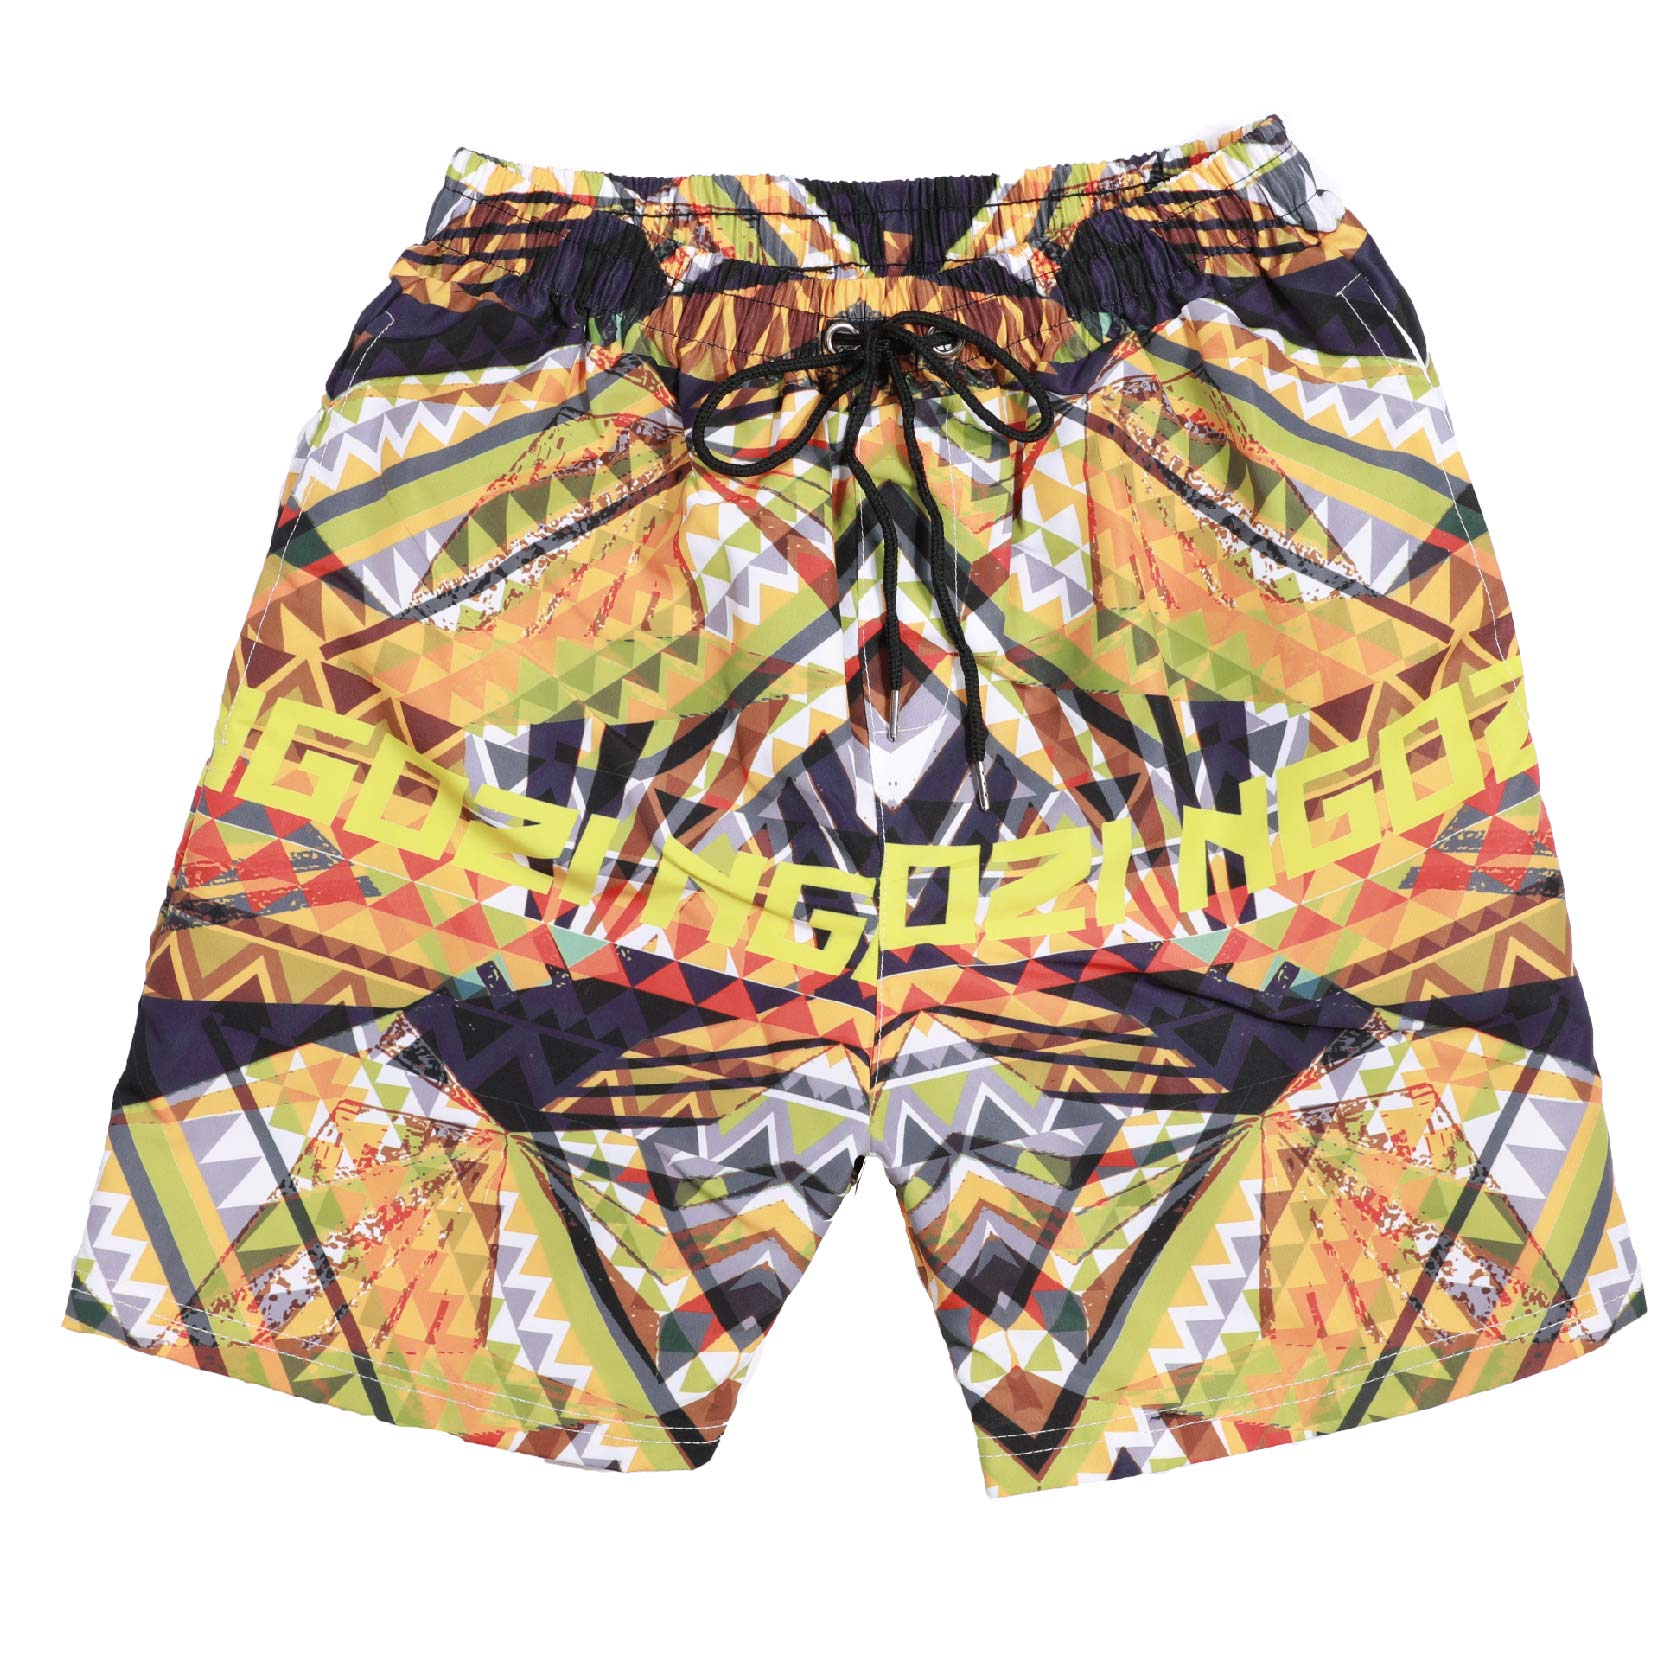 New Delivery for Jogging Suit - Ngozi Beach Shorts Men Quick Dry Dusk Printed Elastic Waist – Fullerton